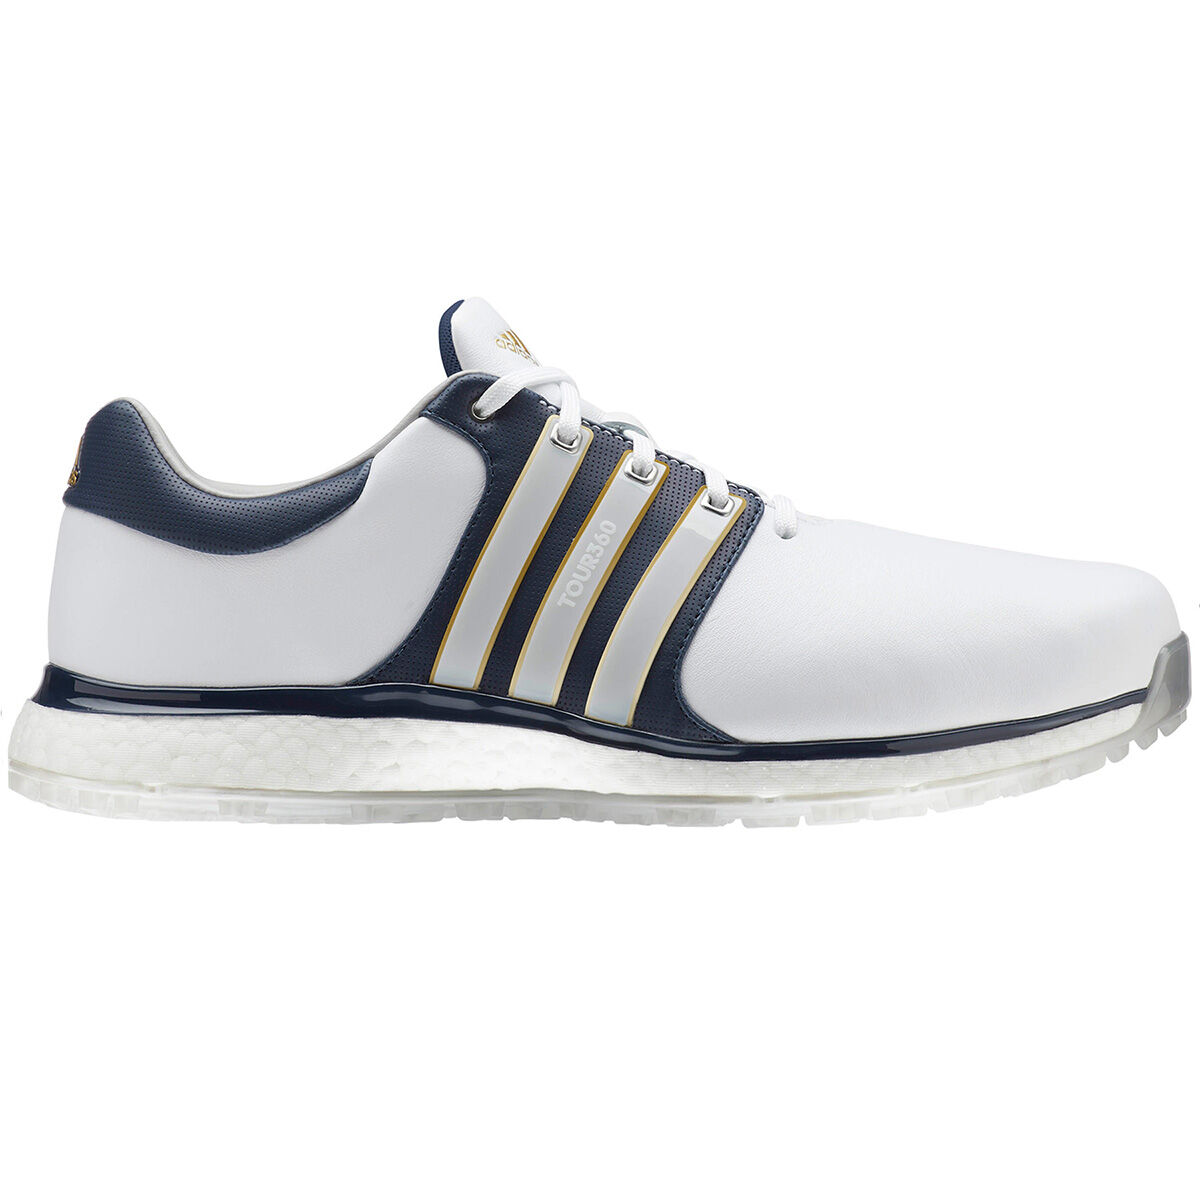 Chaussures adidas Golf Tour 360 XT Spikeless, homme, 7, White/collegaite navy/gold met, Large | Onli